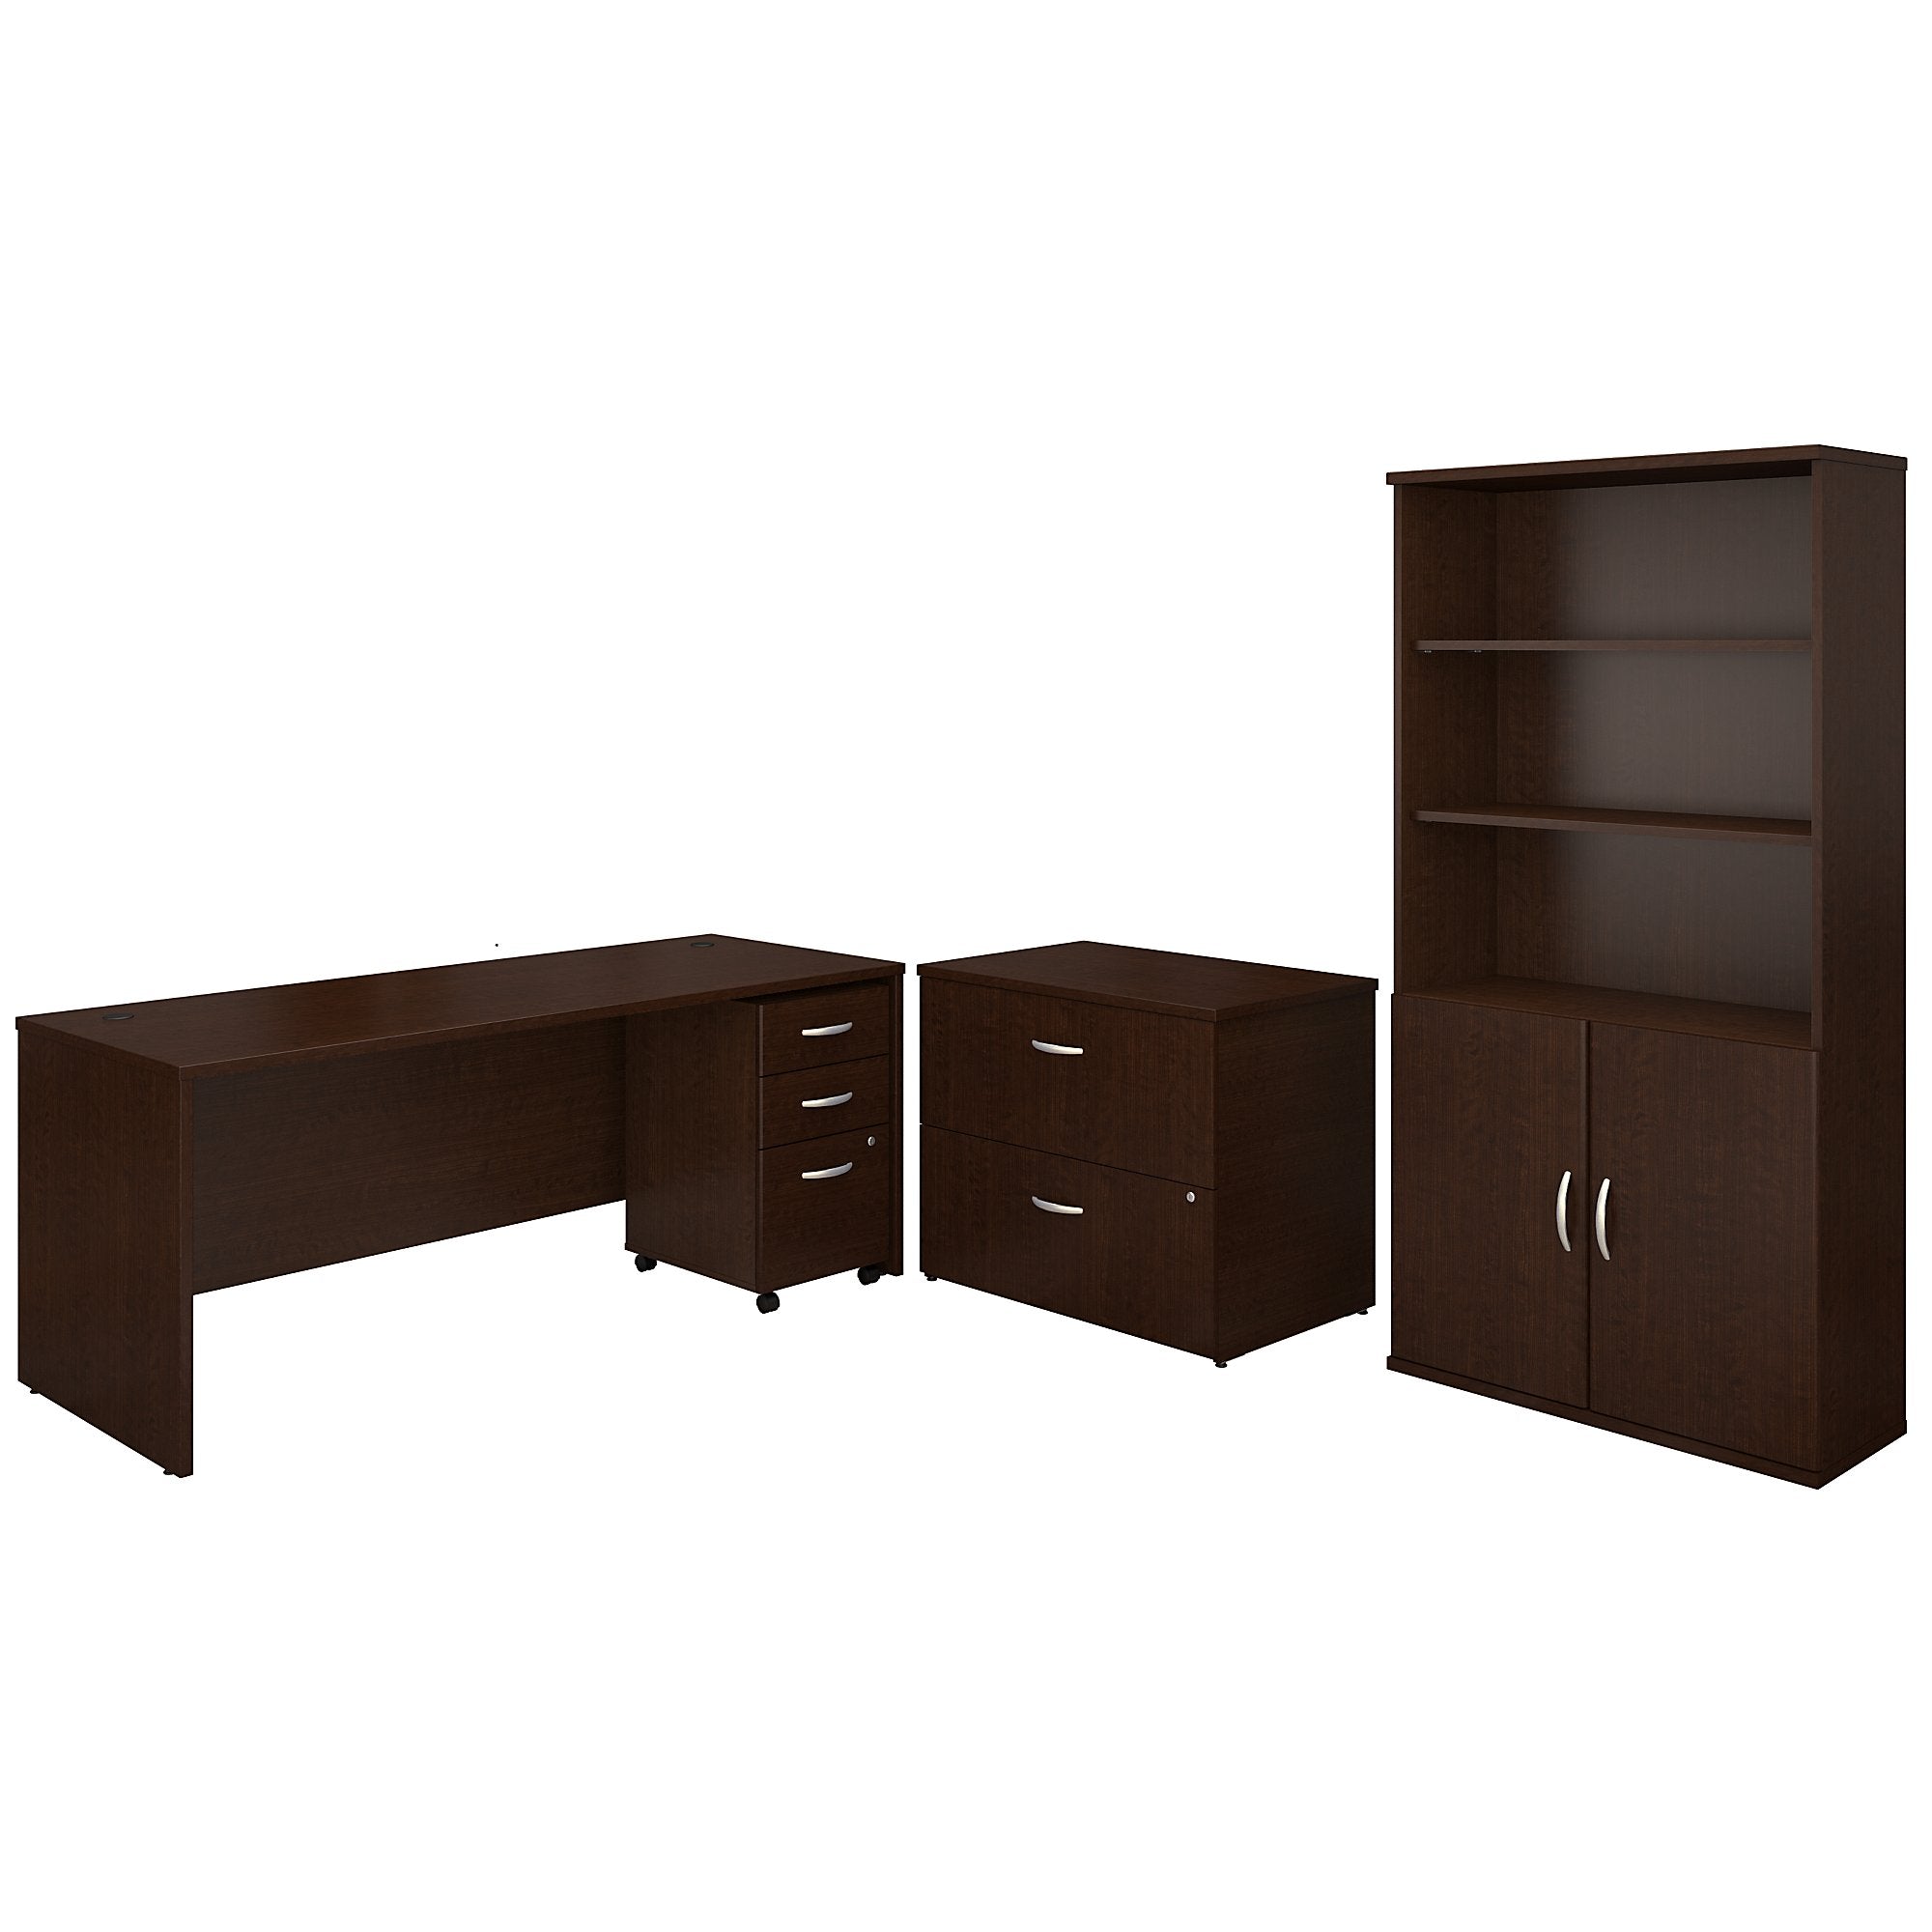 Bush Business Furniture Series C 72W Office Desk with Bookcase and File Cabinets | Mocha Cherry